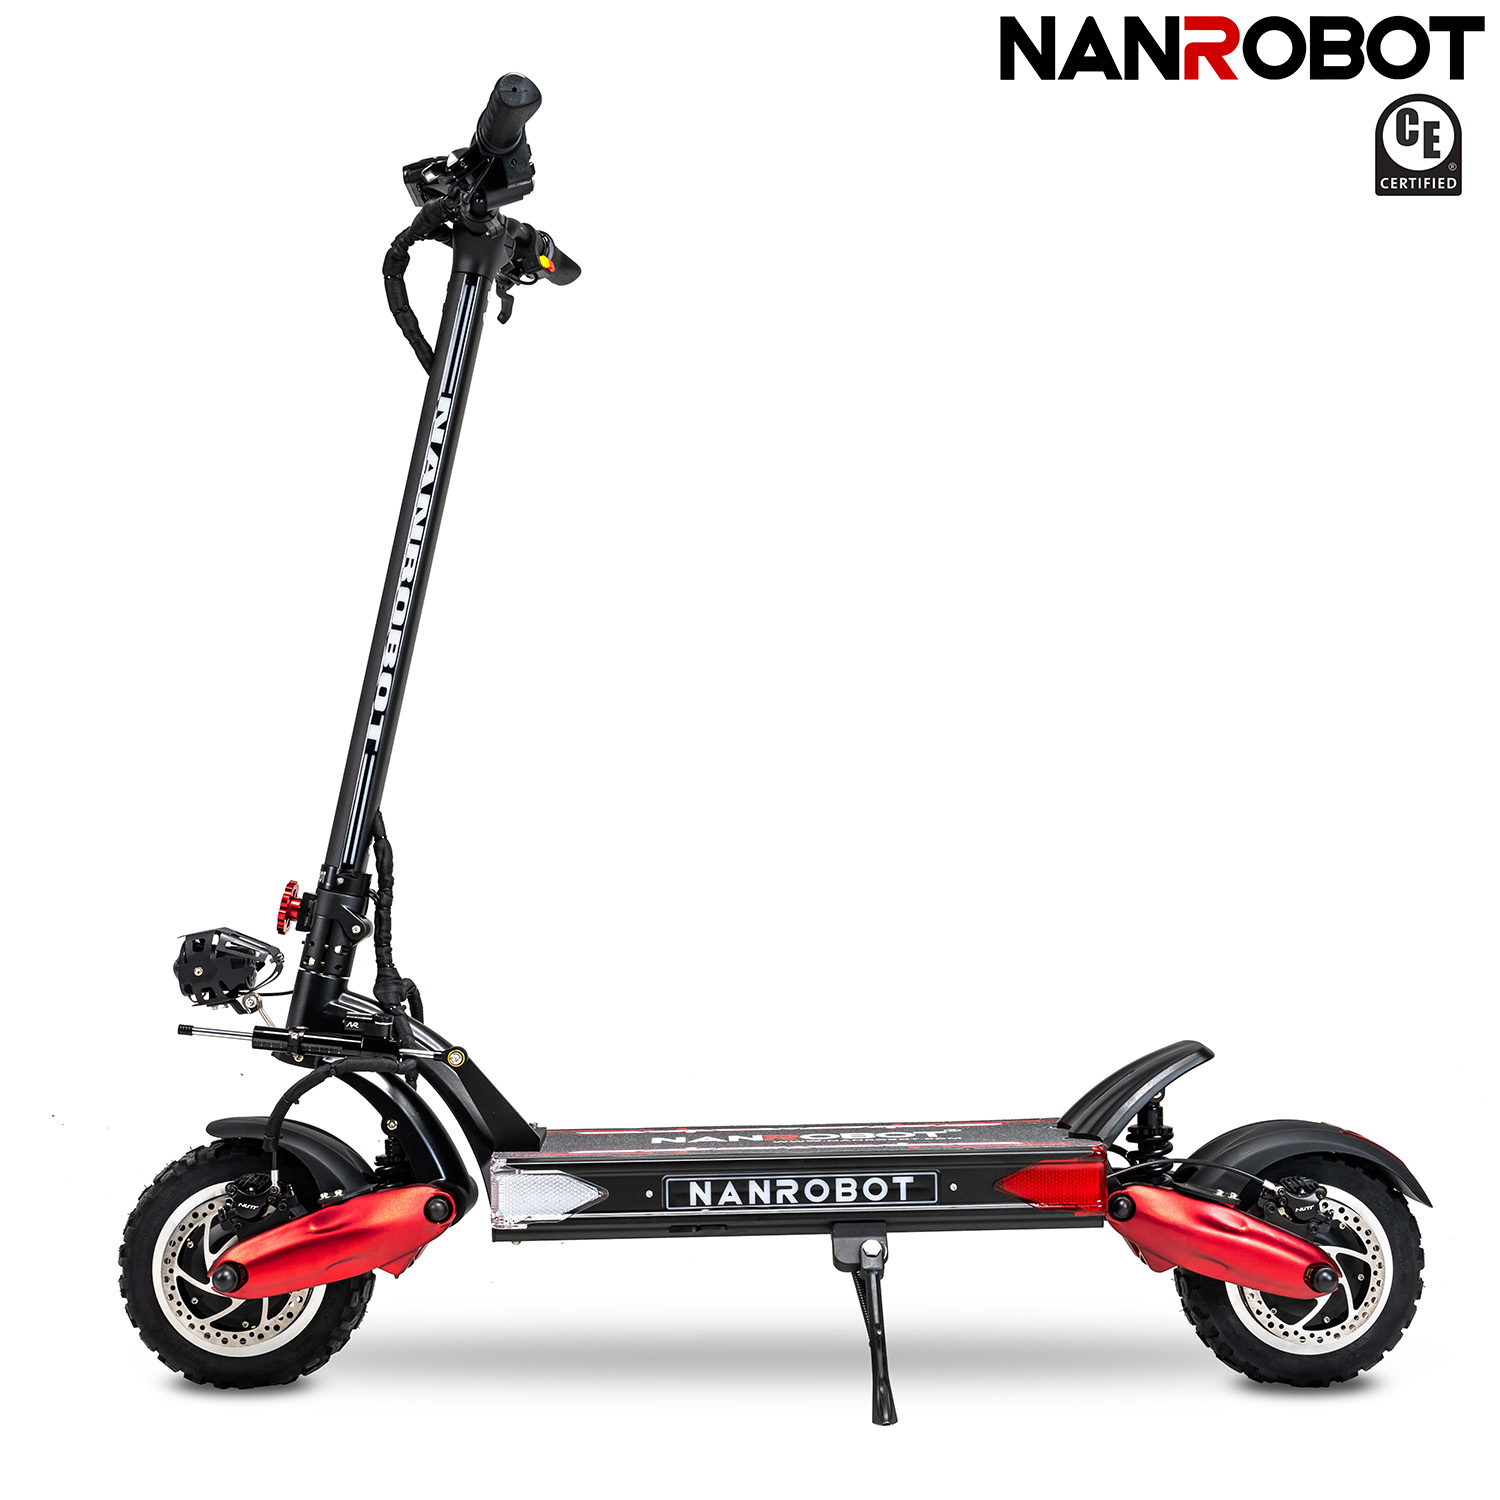 ODM Free Shipping Electric Scooter Supplier –  NANROBOT LS7+ ELECTRIC SCOOTER -4800W-60V 40AH – Nanrobot